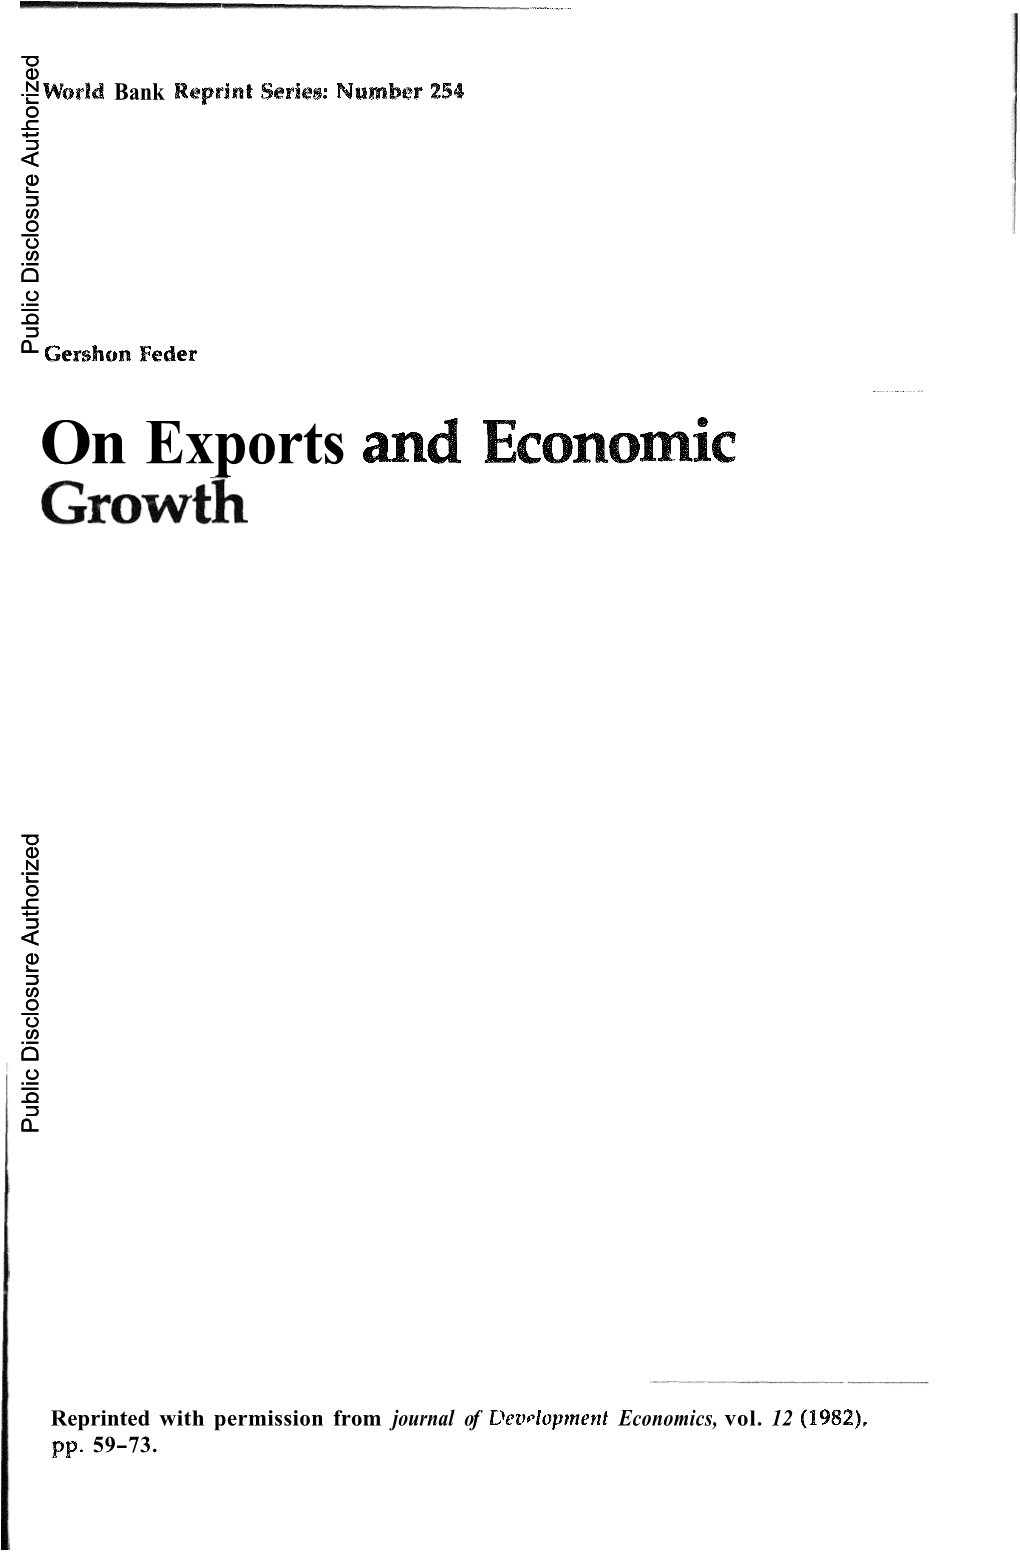 On Exports and Economic Growth